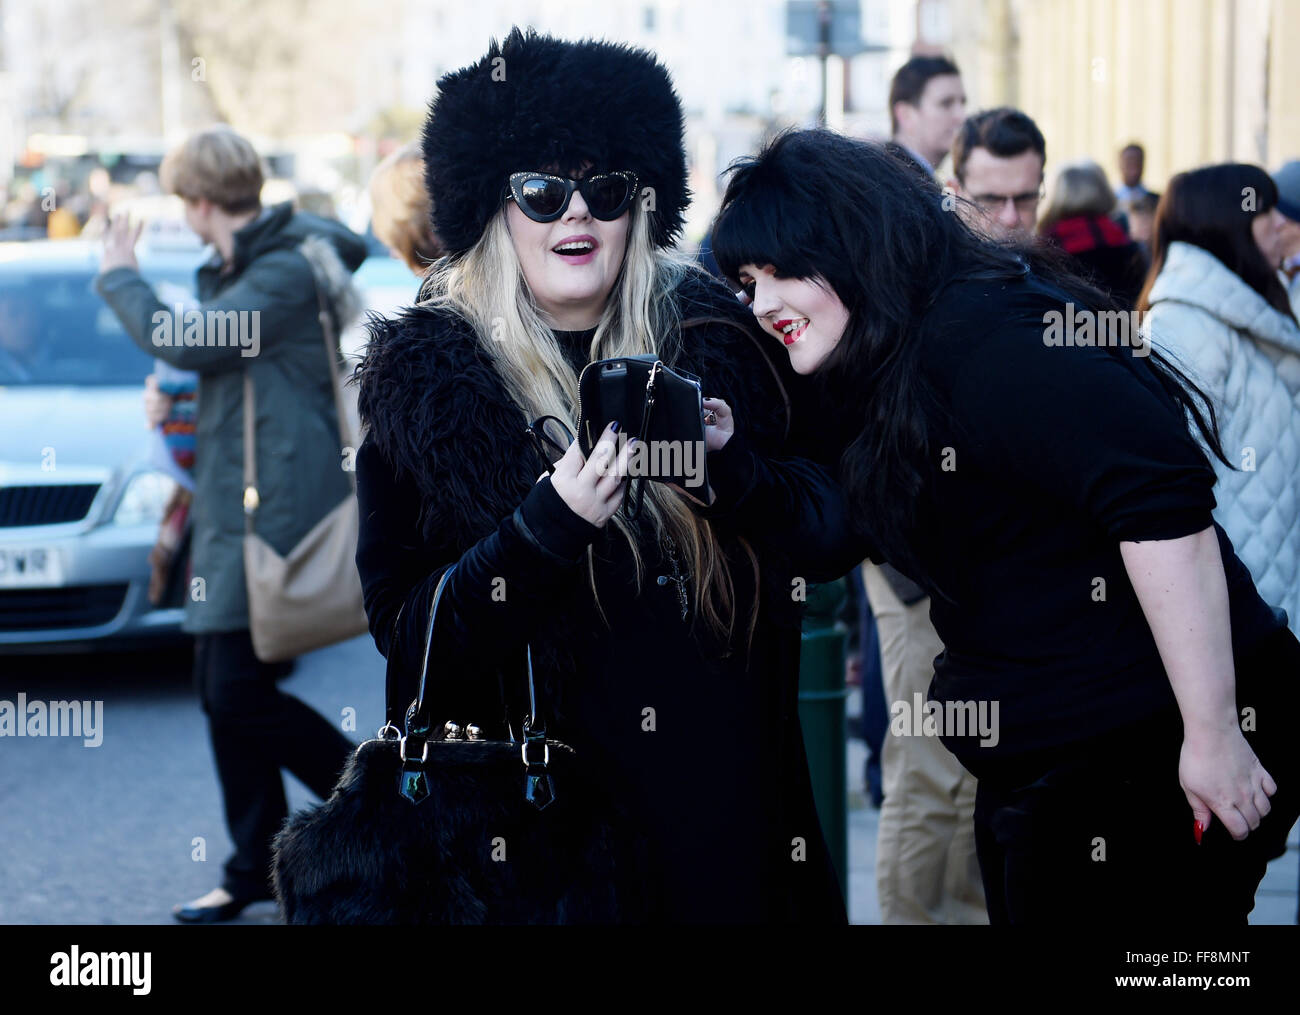 Brighton, UK. 11th February, 2016. This couple of fashionable ladies are dressed to stay warm as the weather turns colder in Brighton today as they attended the University of Brighton Graduation Ceremony held in The Dome . The forecast is for colder weather to spread across Britain with snow predicted for next week  Credit:  Simon Dack/Alamy Live News Stock Photo